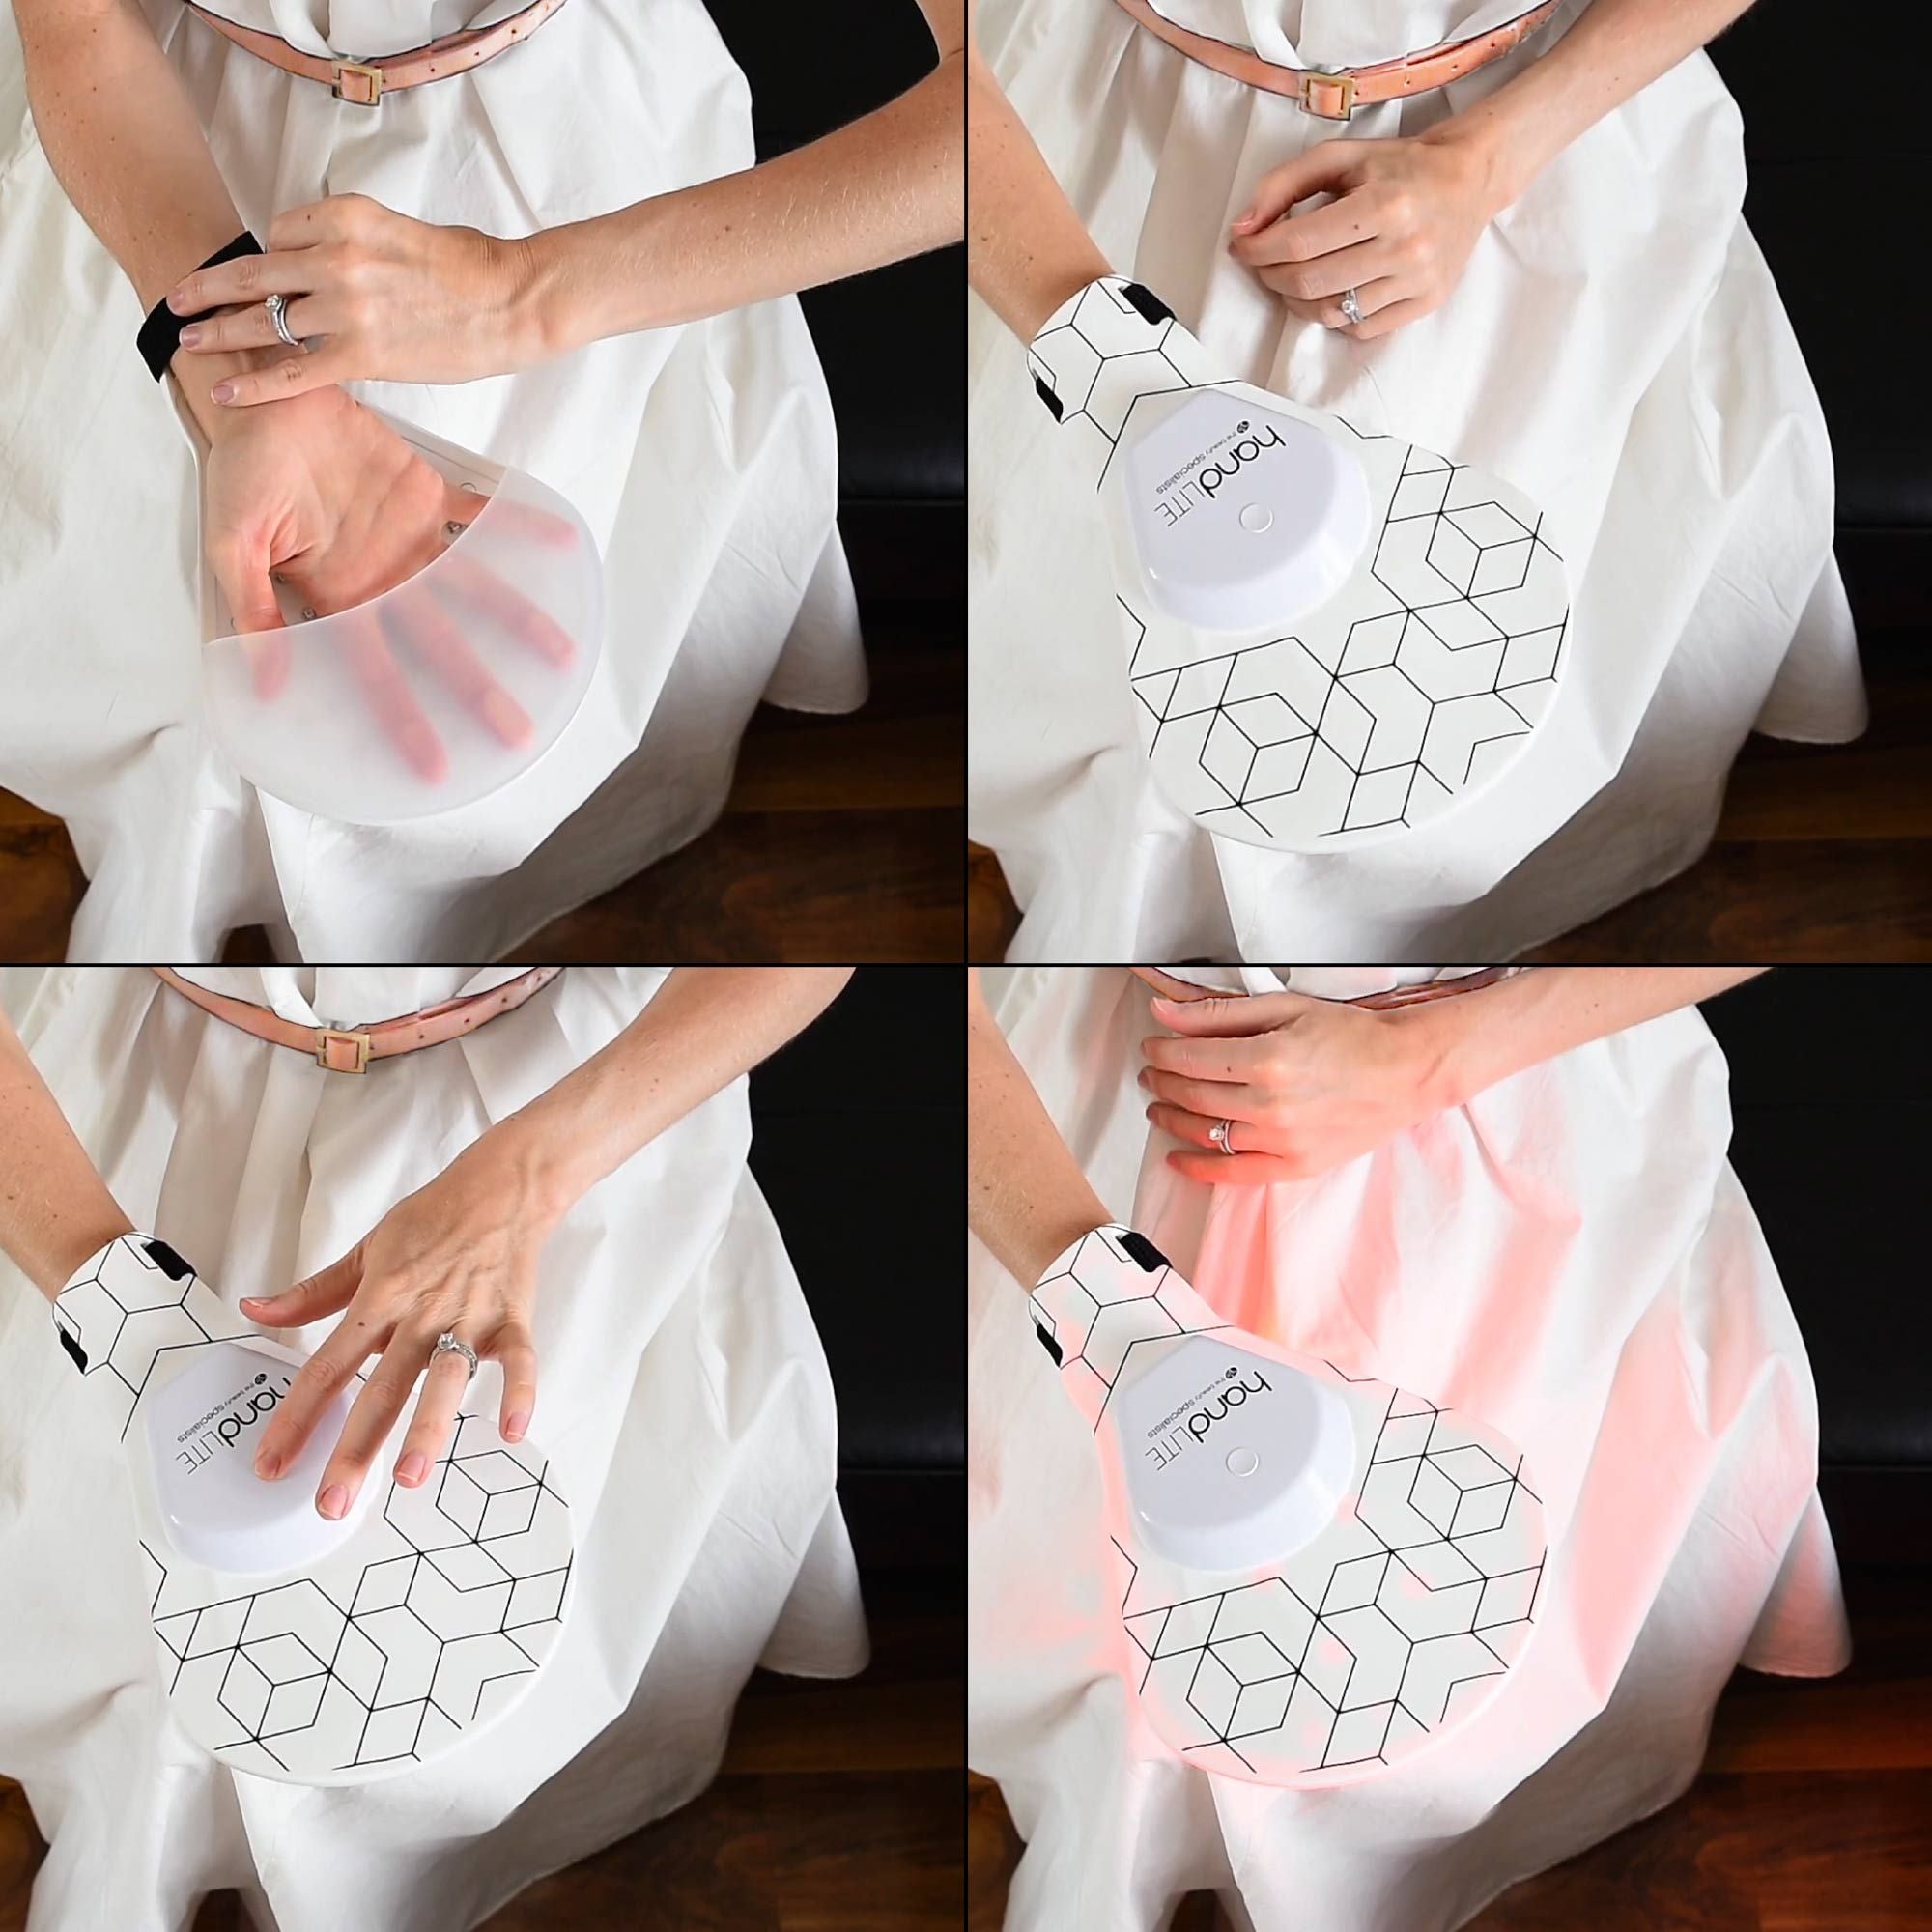 4 small images of the handLITE LED light treatment glove being worn by someone wearing a white dress.